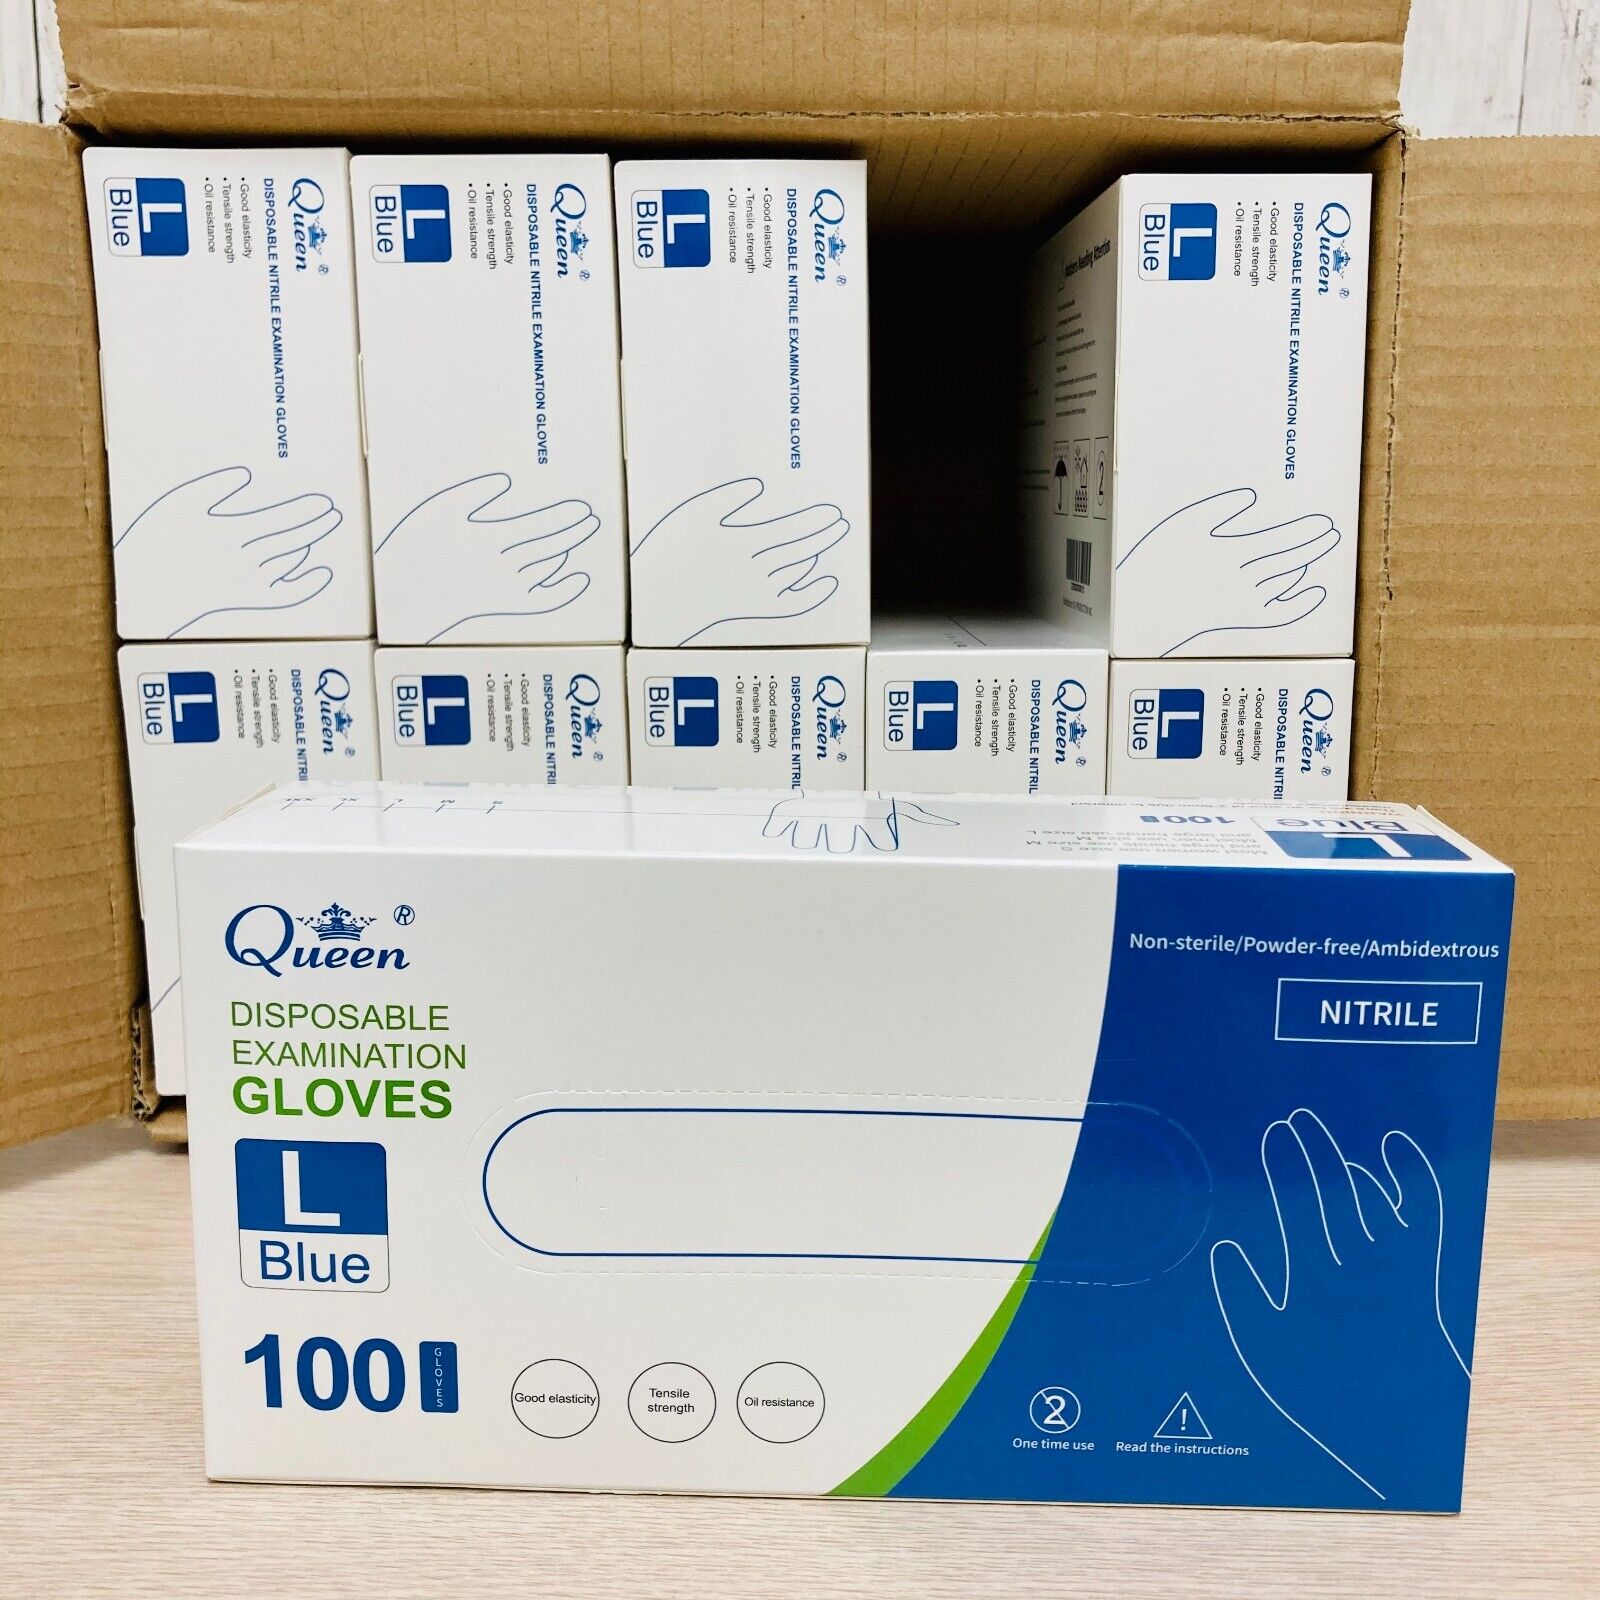 Queen nitrile disposable gloves large case 1000